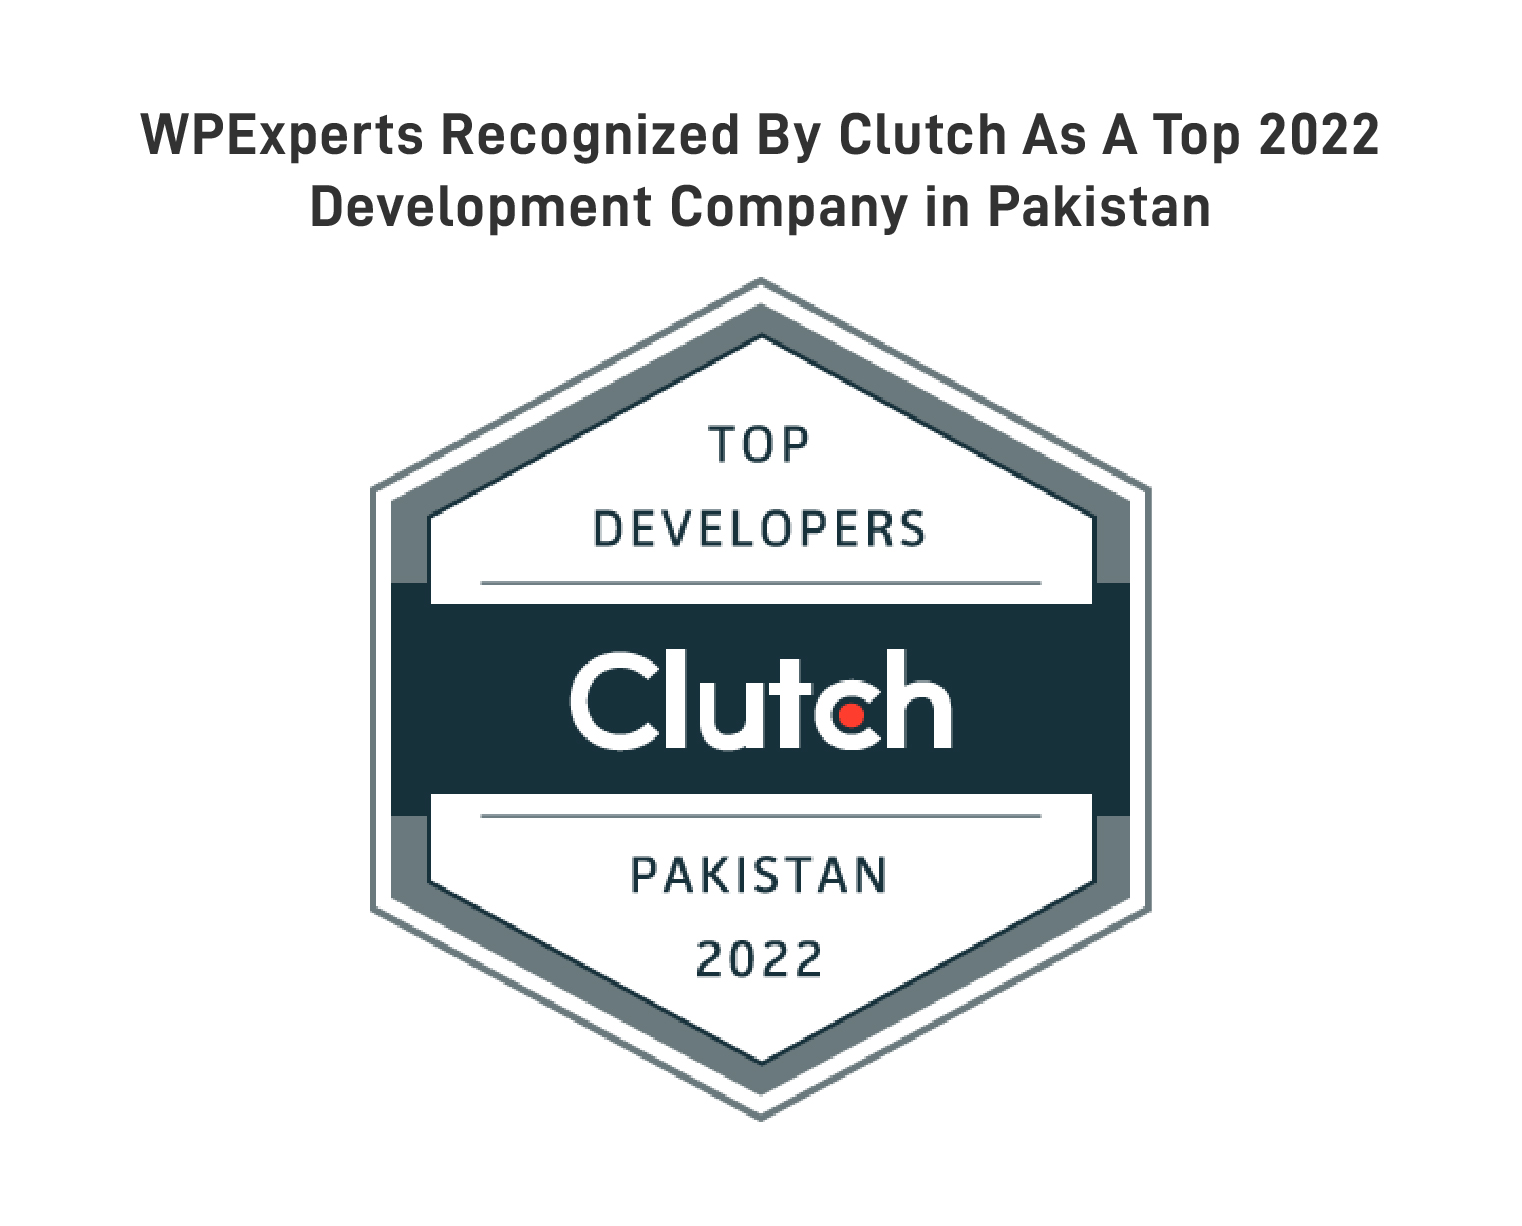 WPExperts Recognized by Clutch